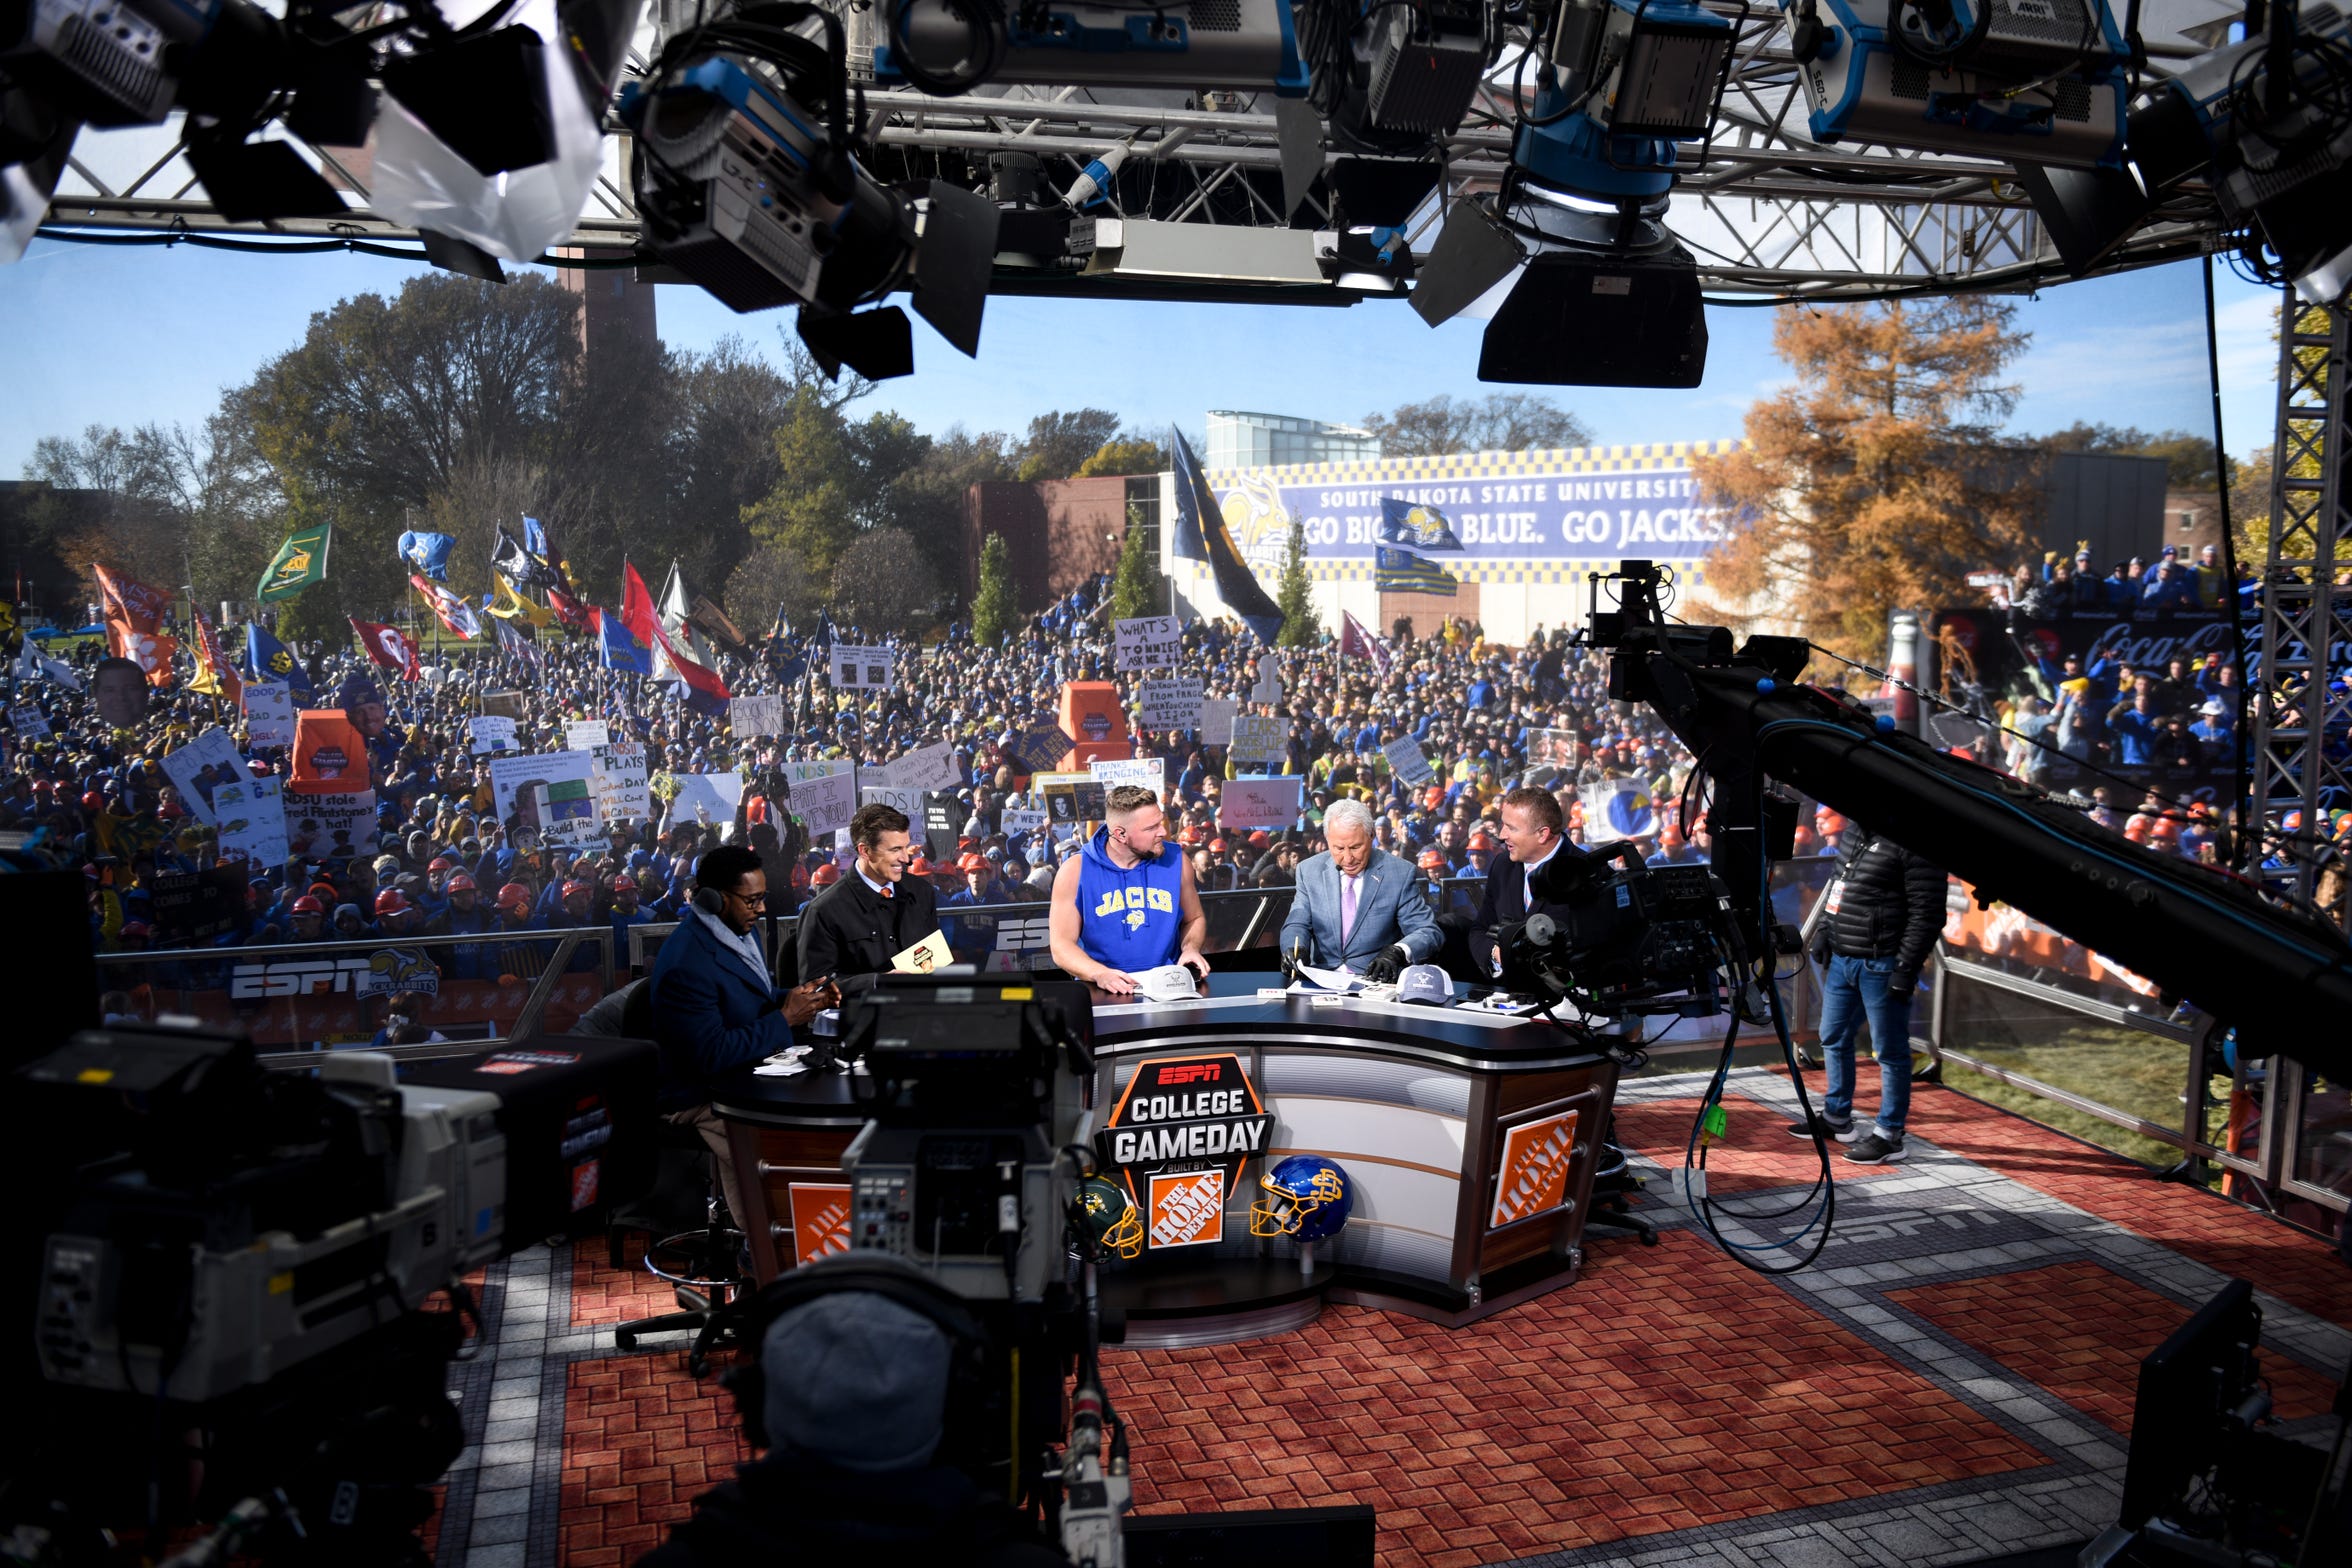 Celebrity guest picker Pat McAfee joins ESPN GameDay hosts during the broadcast on Saturday, Oct. 26, 2019 in Brookings, S.D. McAfee's pick for the Dakota Marker game was the Jacks.